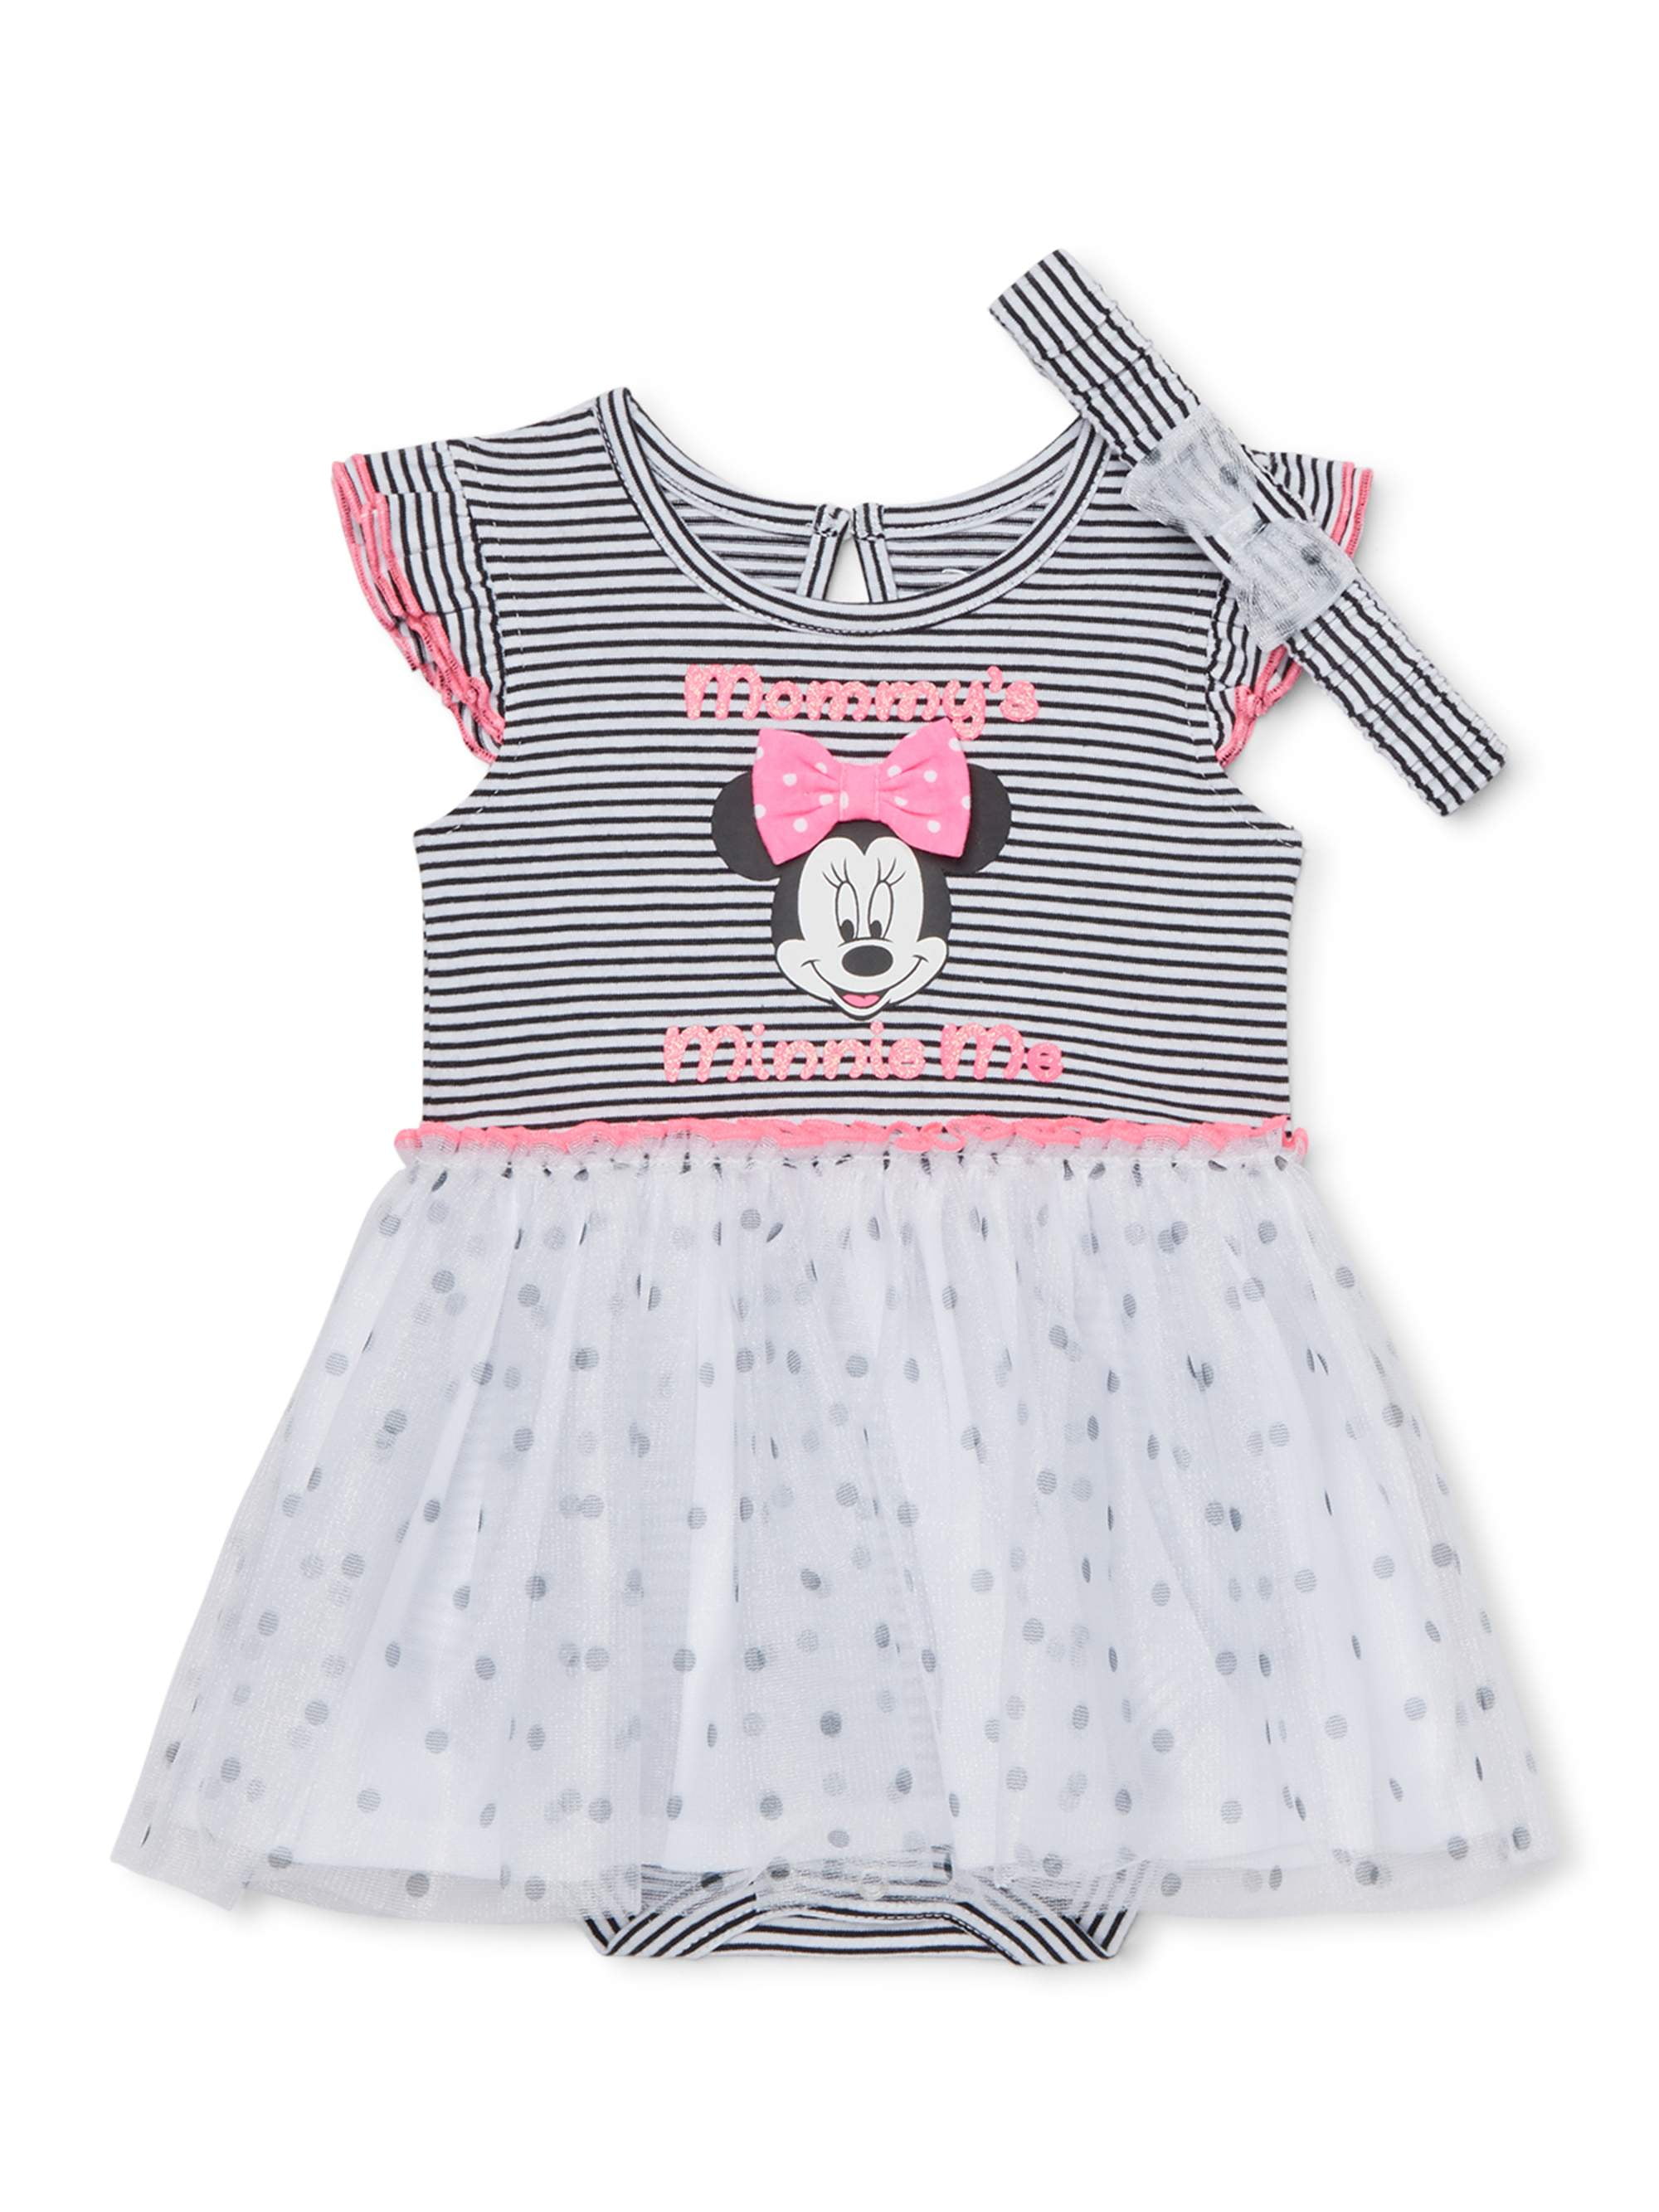 minnie mouse baby items